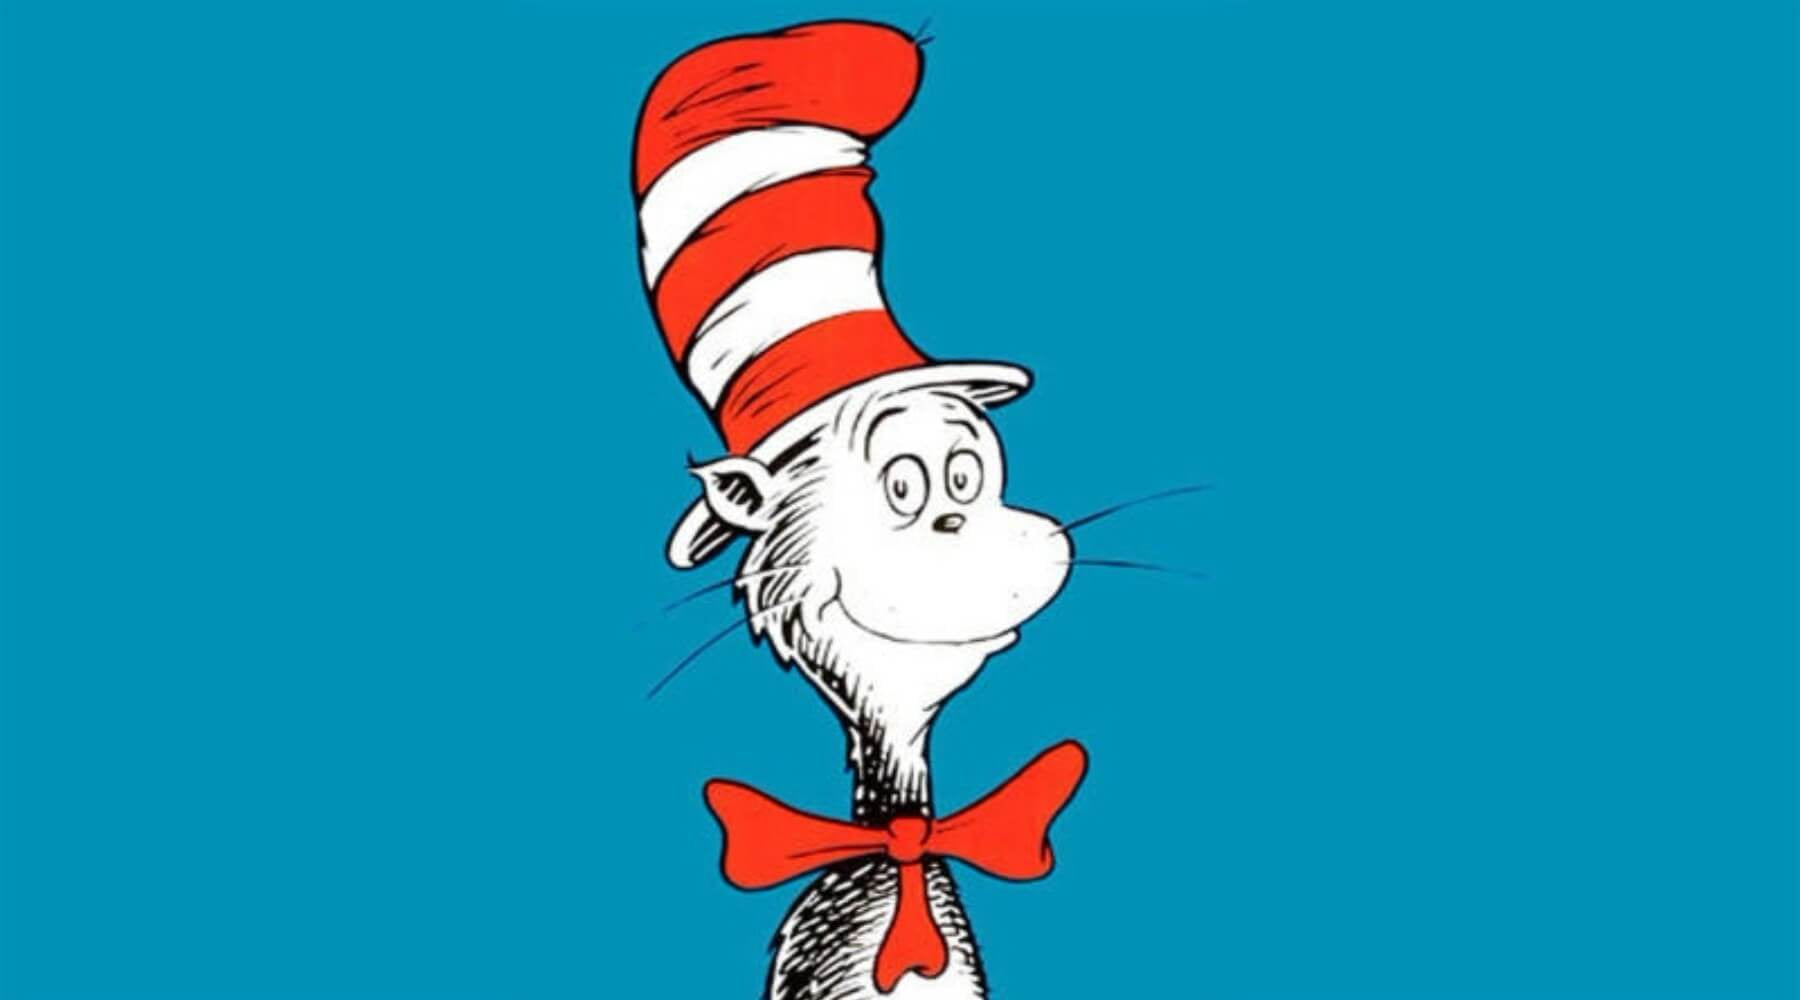 Dr. Seuss Was Right, with Andy Frisella - MFCEO99